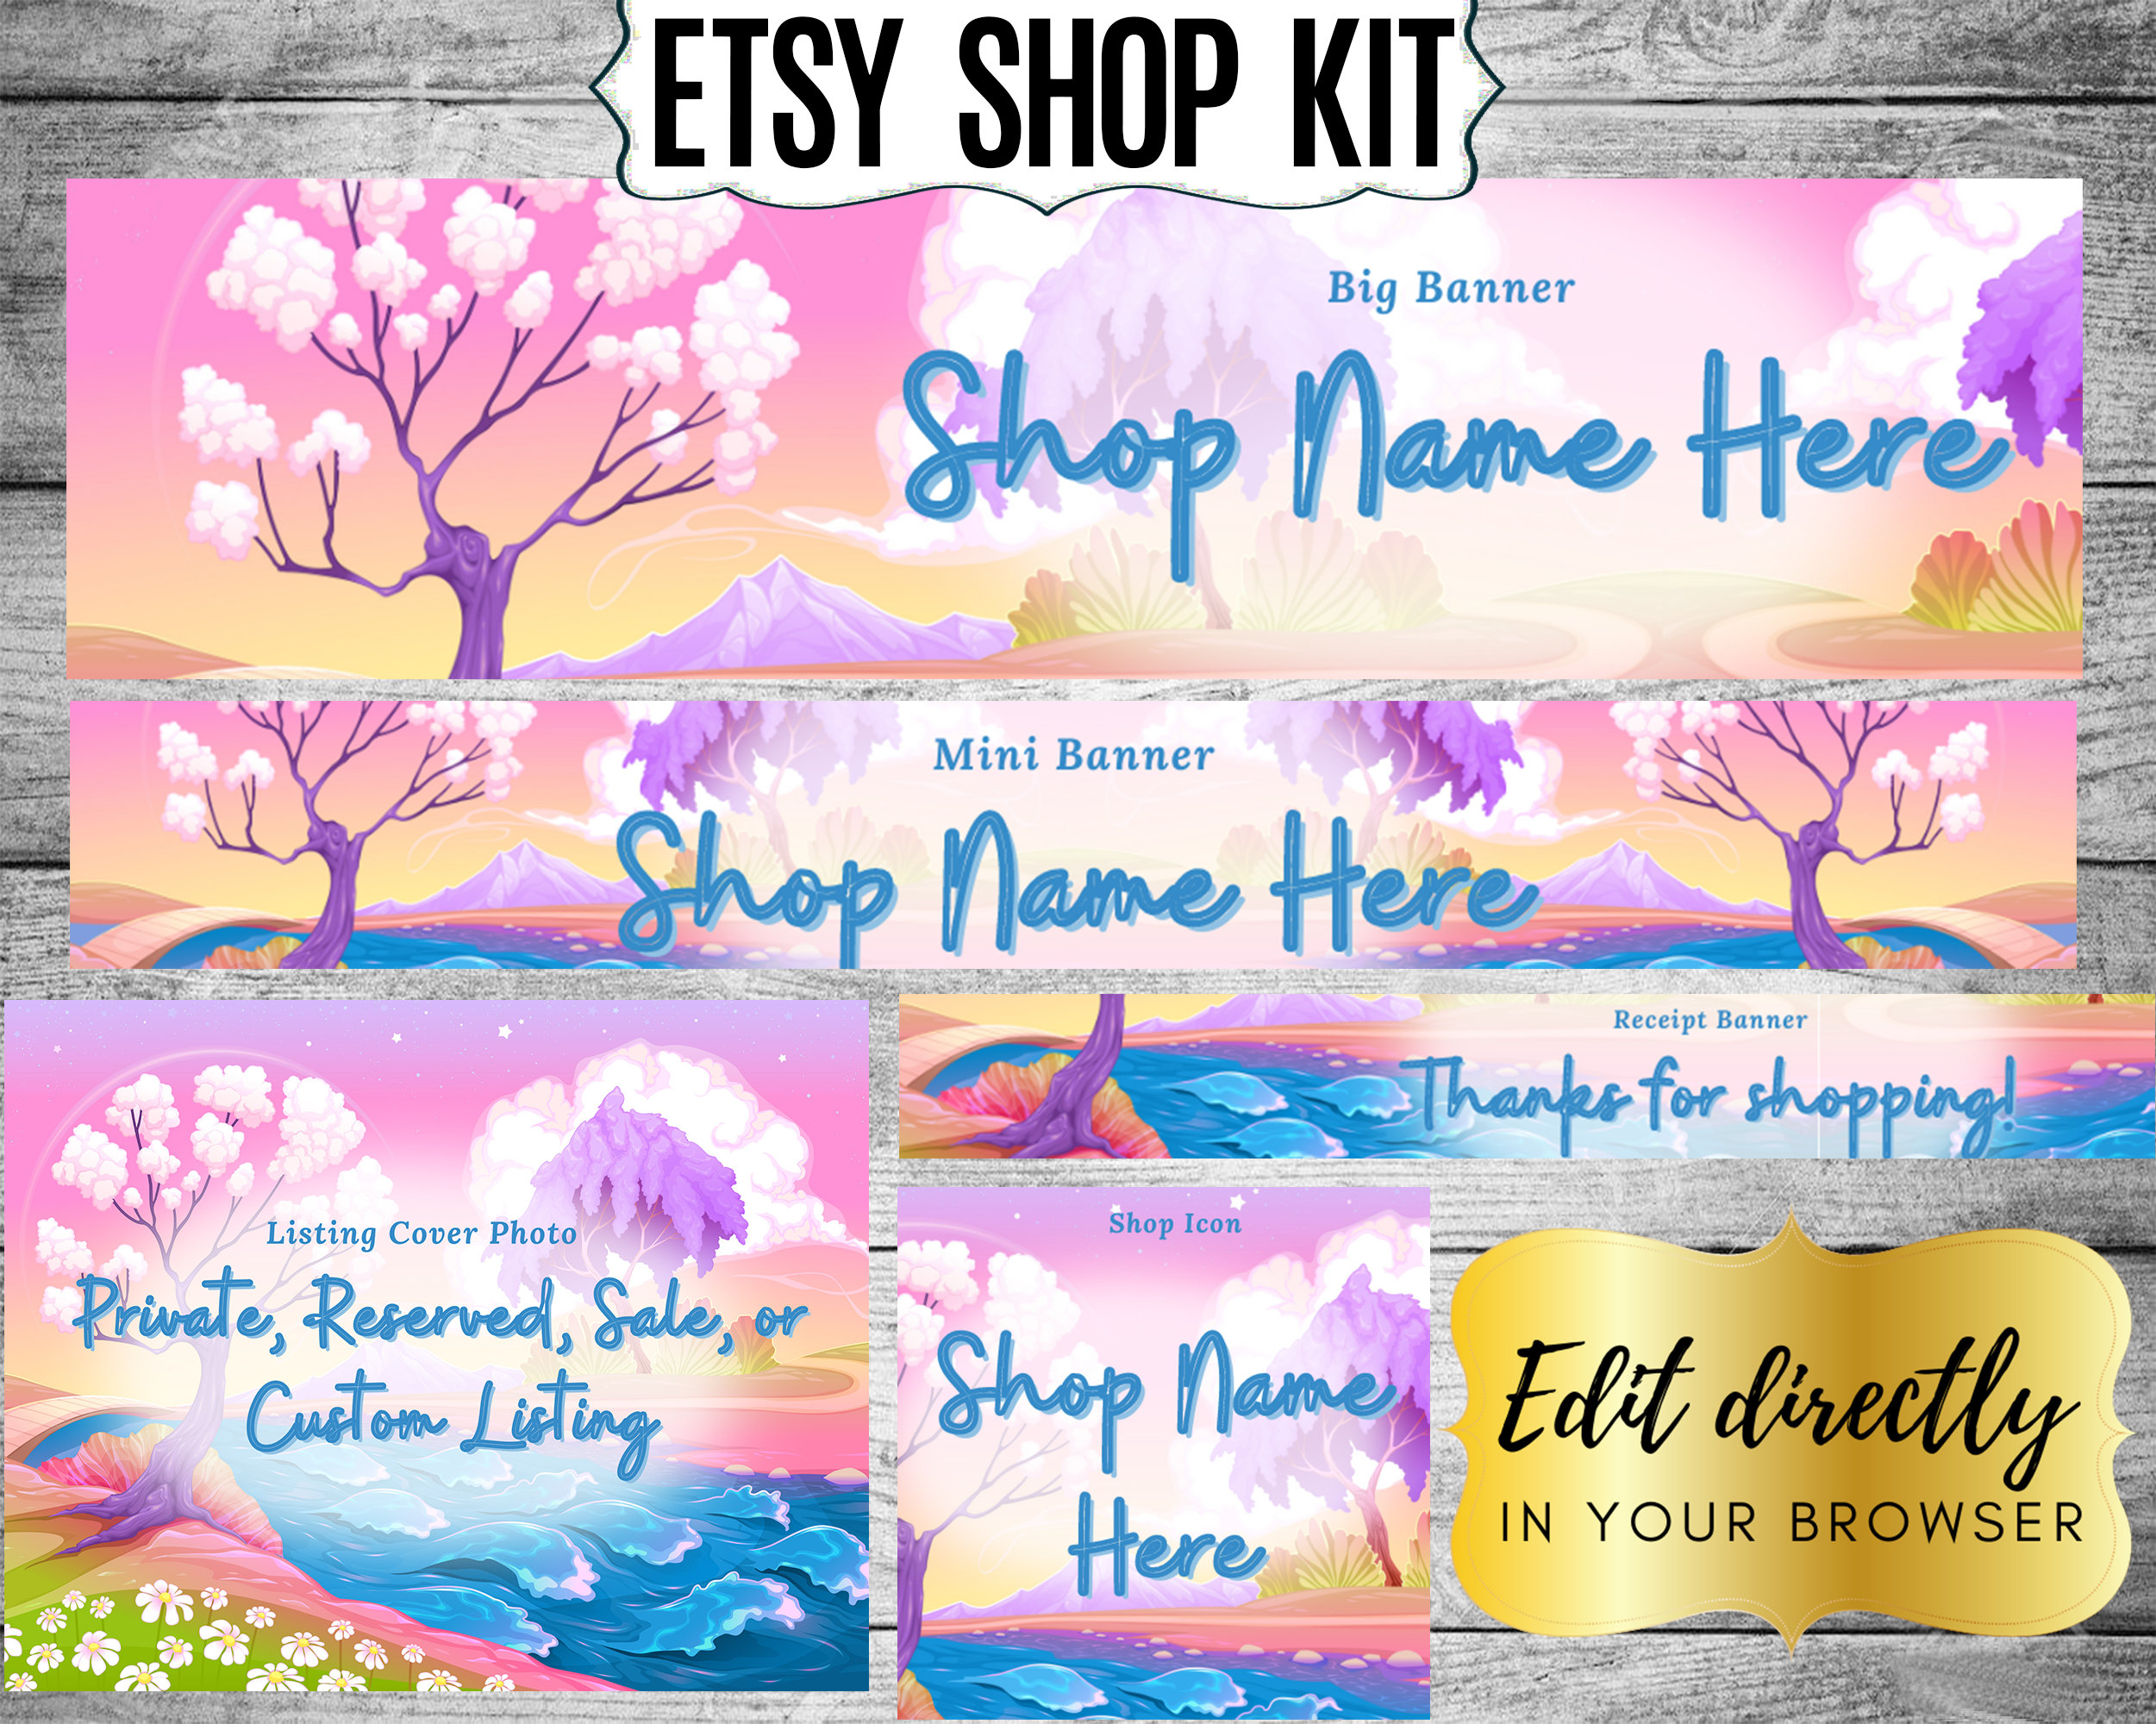 mini and receipt banners; listing cover & shop icon Bohemian Unicorn Etsy Shop Banner Set w big Magical beautiful horned majestic horse